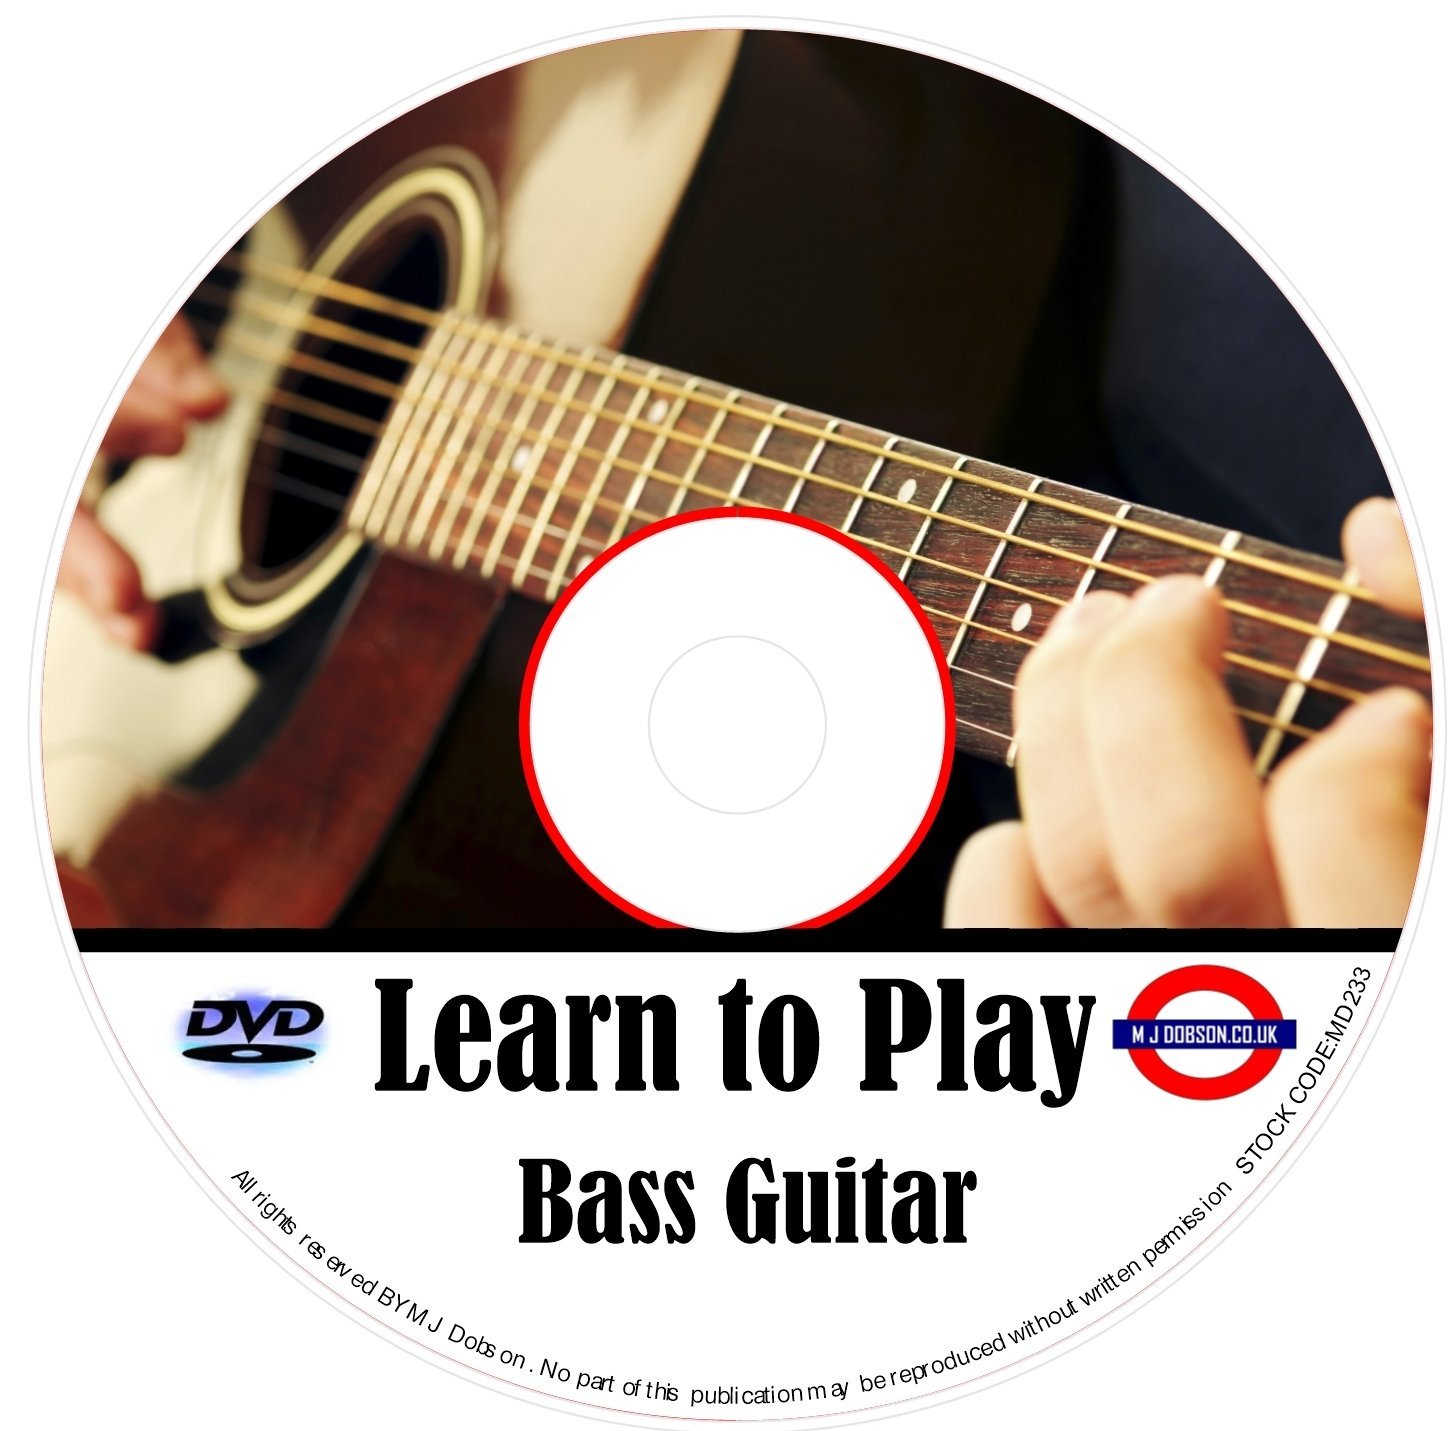 LEARN BASS GUITAR VIDEO TUTORIALS FOR BEGINNERS LEARN TO PLAY | eBay